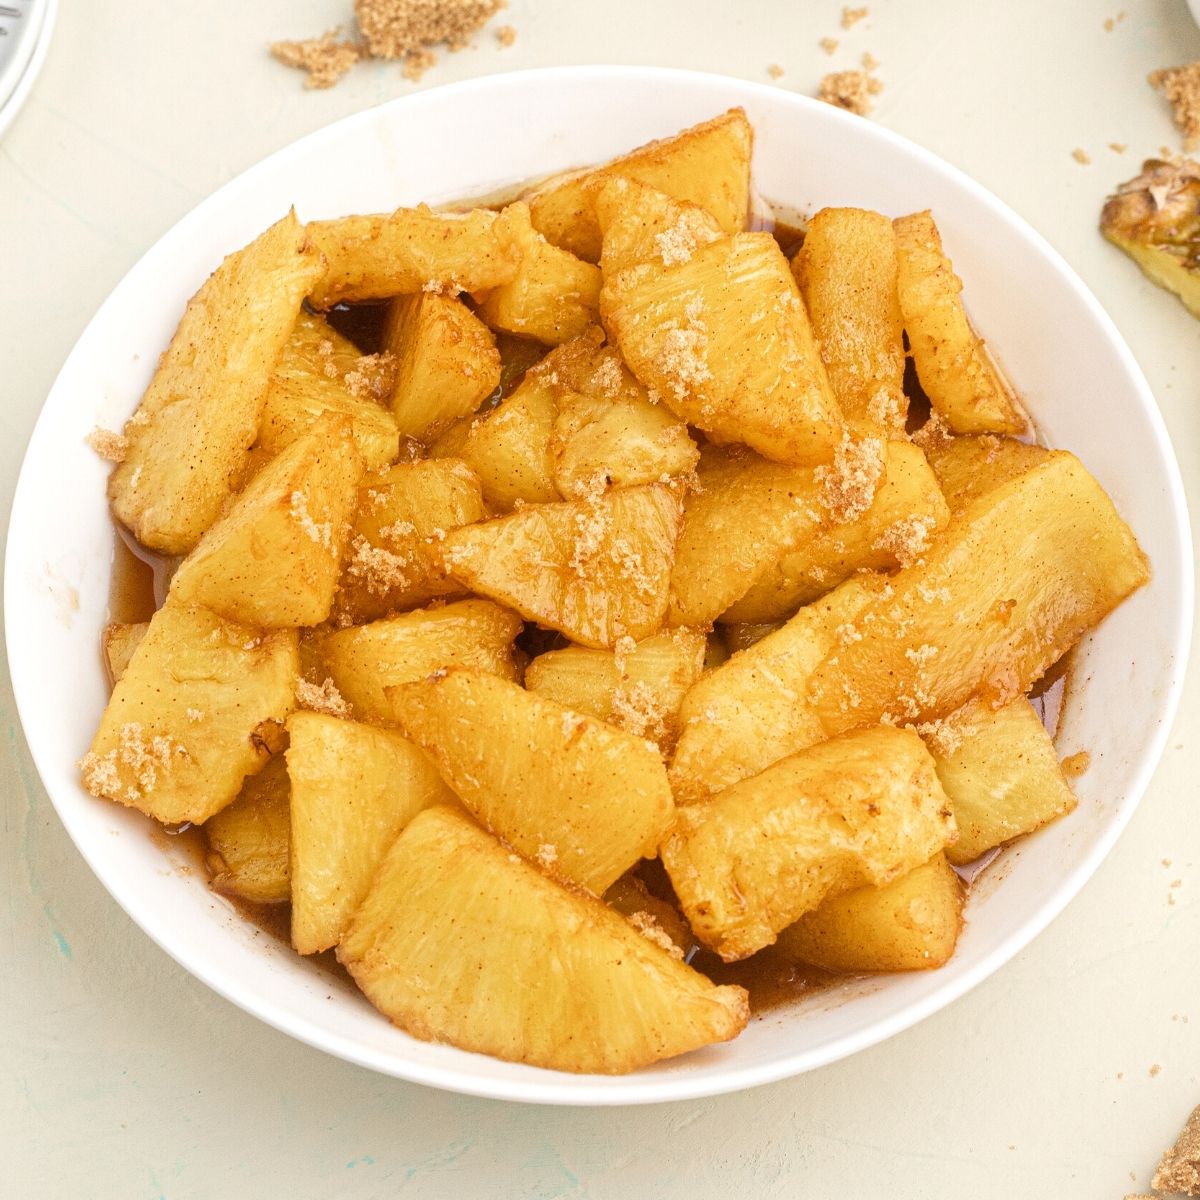 Golden juicy pineapple bites, in juices, served in a white bowl, topped with sprinkled brown sugar.